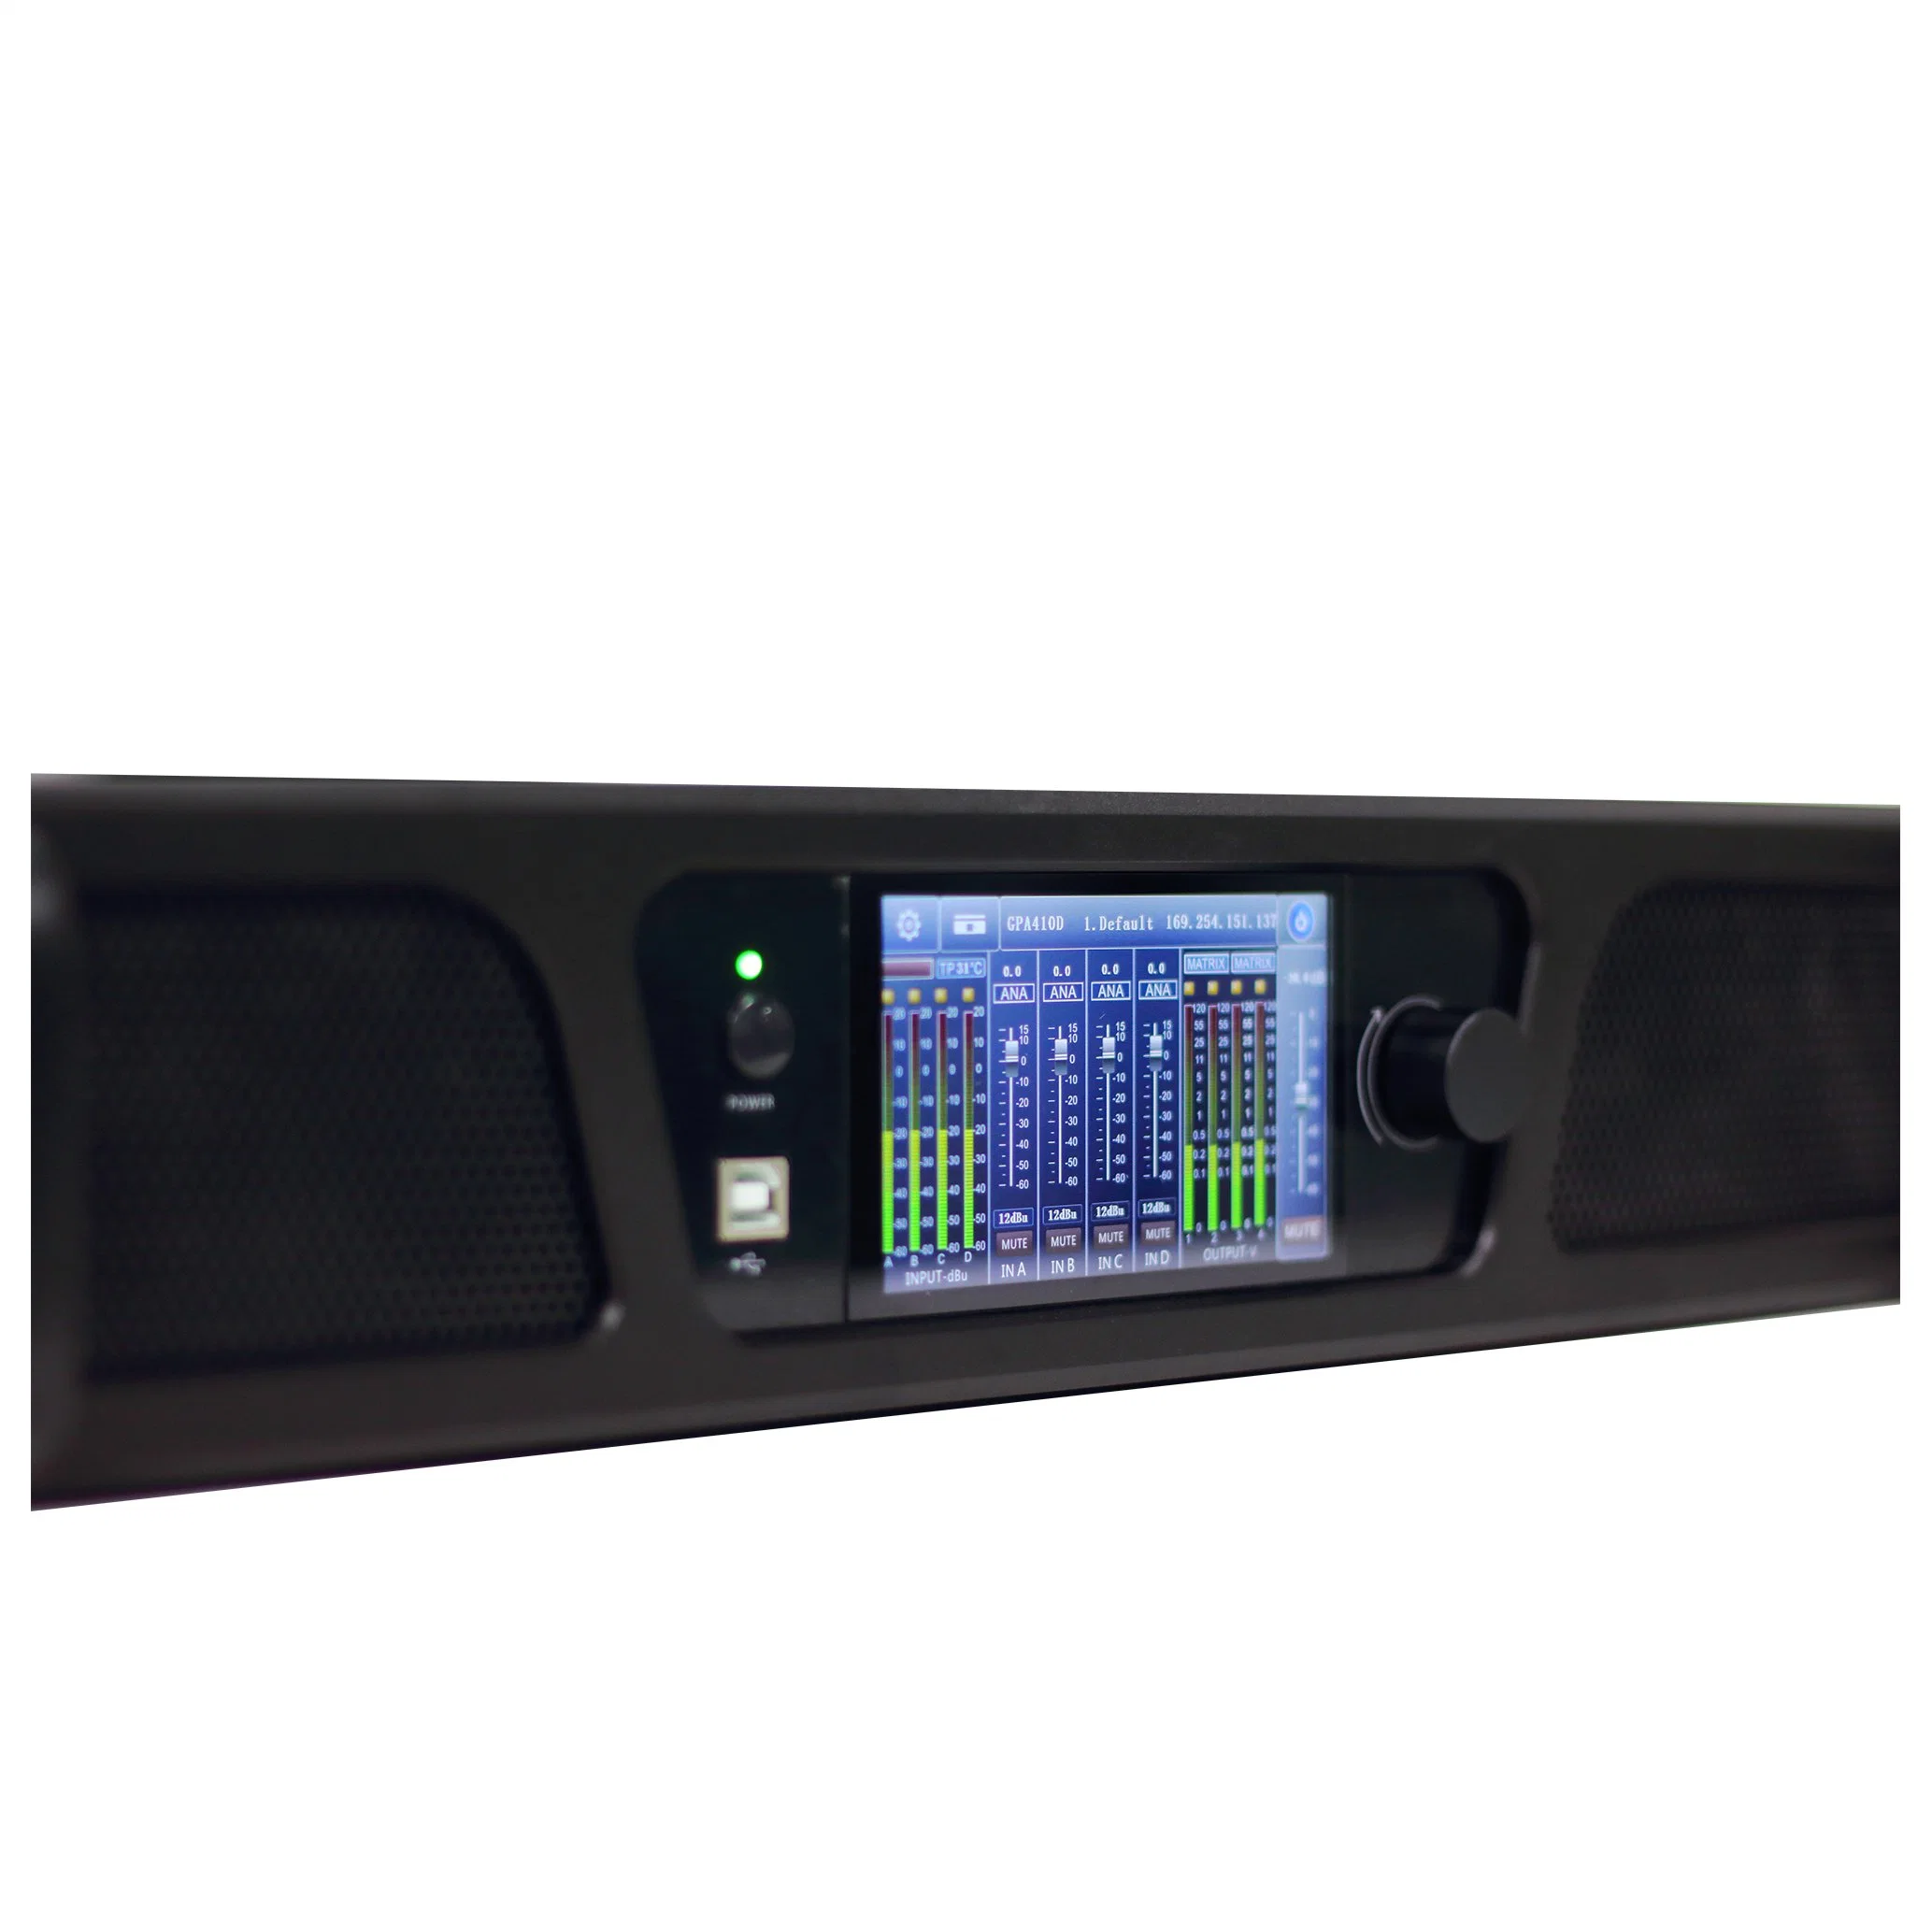 Dante 4 Channel Digital Power Amplifier with Network TCP/IP Control and Built-in DSP Digital Processor